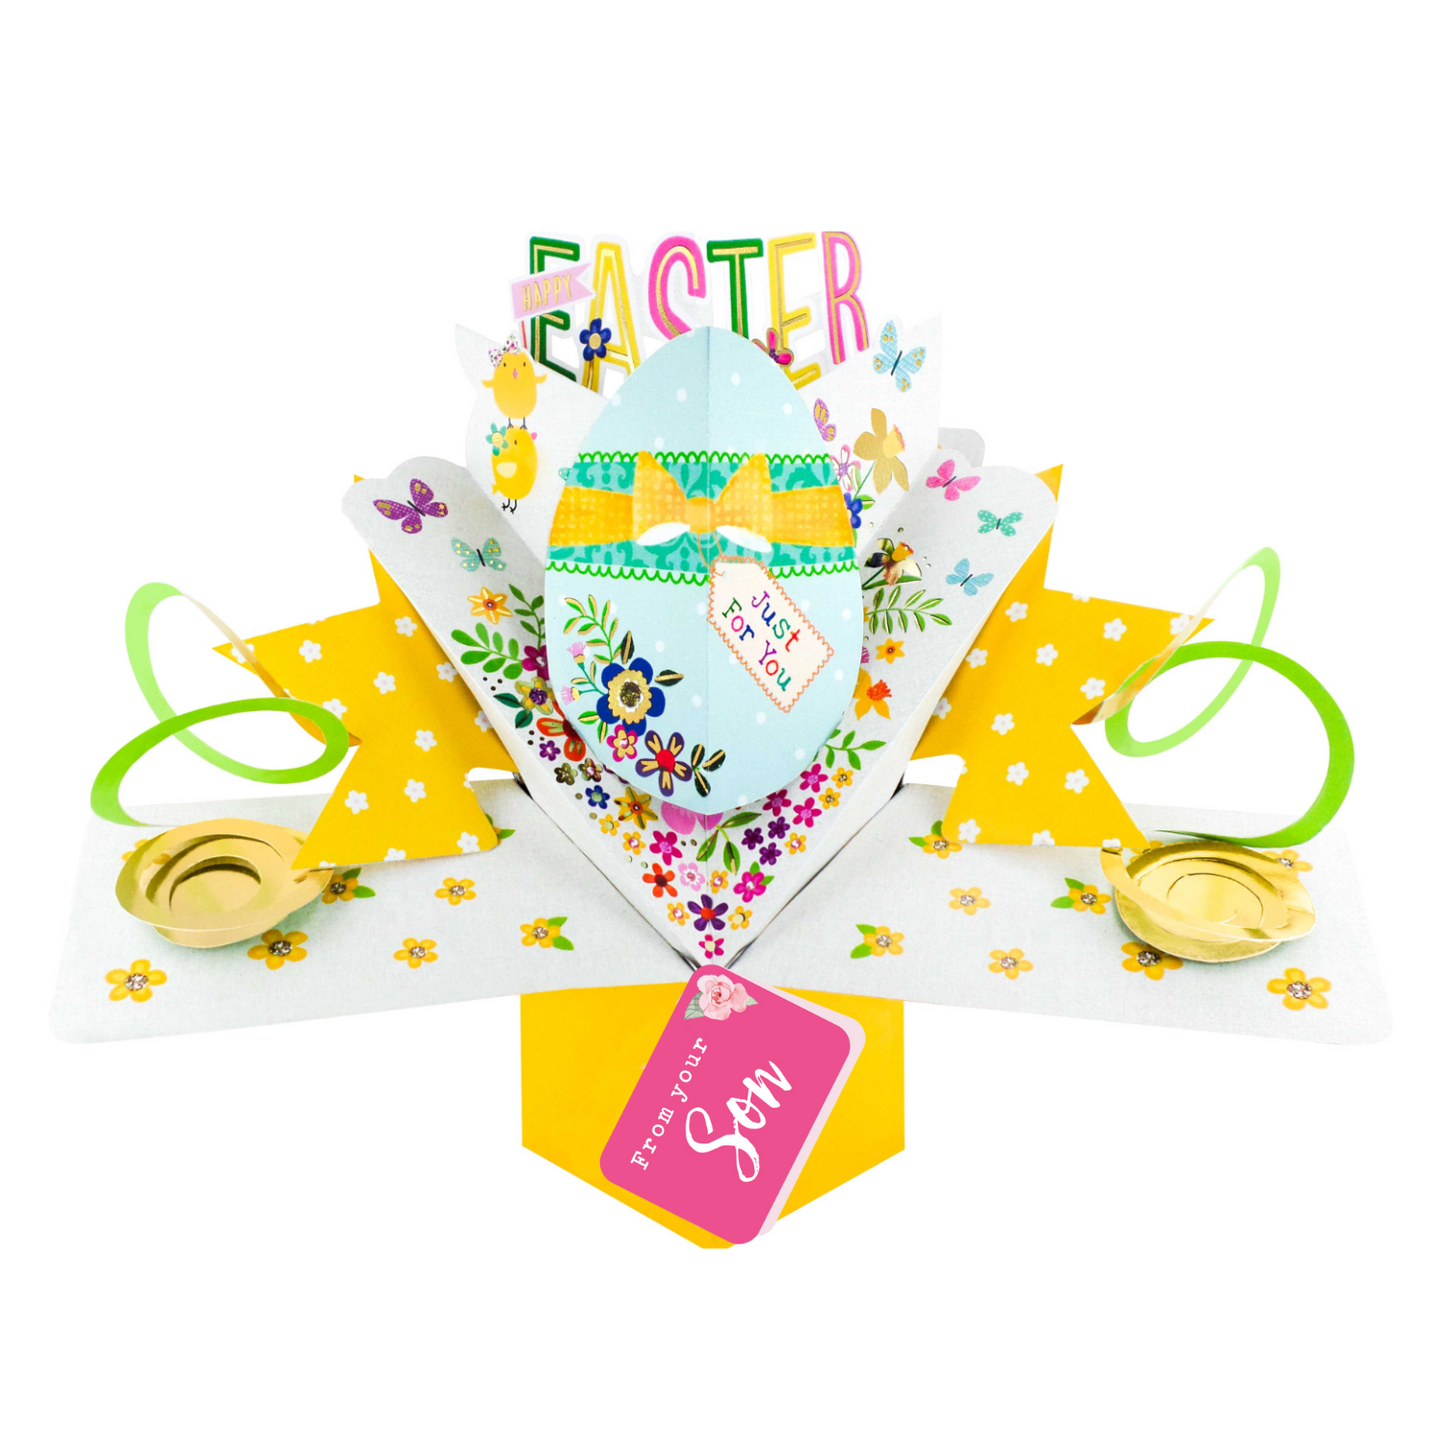 Mum From Your Son Happy Easter Decorated Egg Pop Up Easter Card